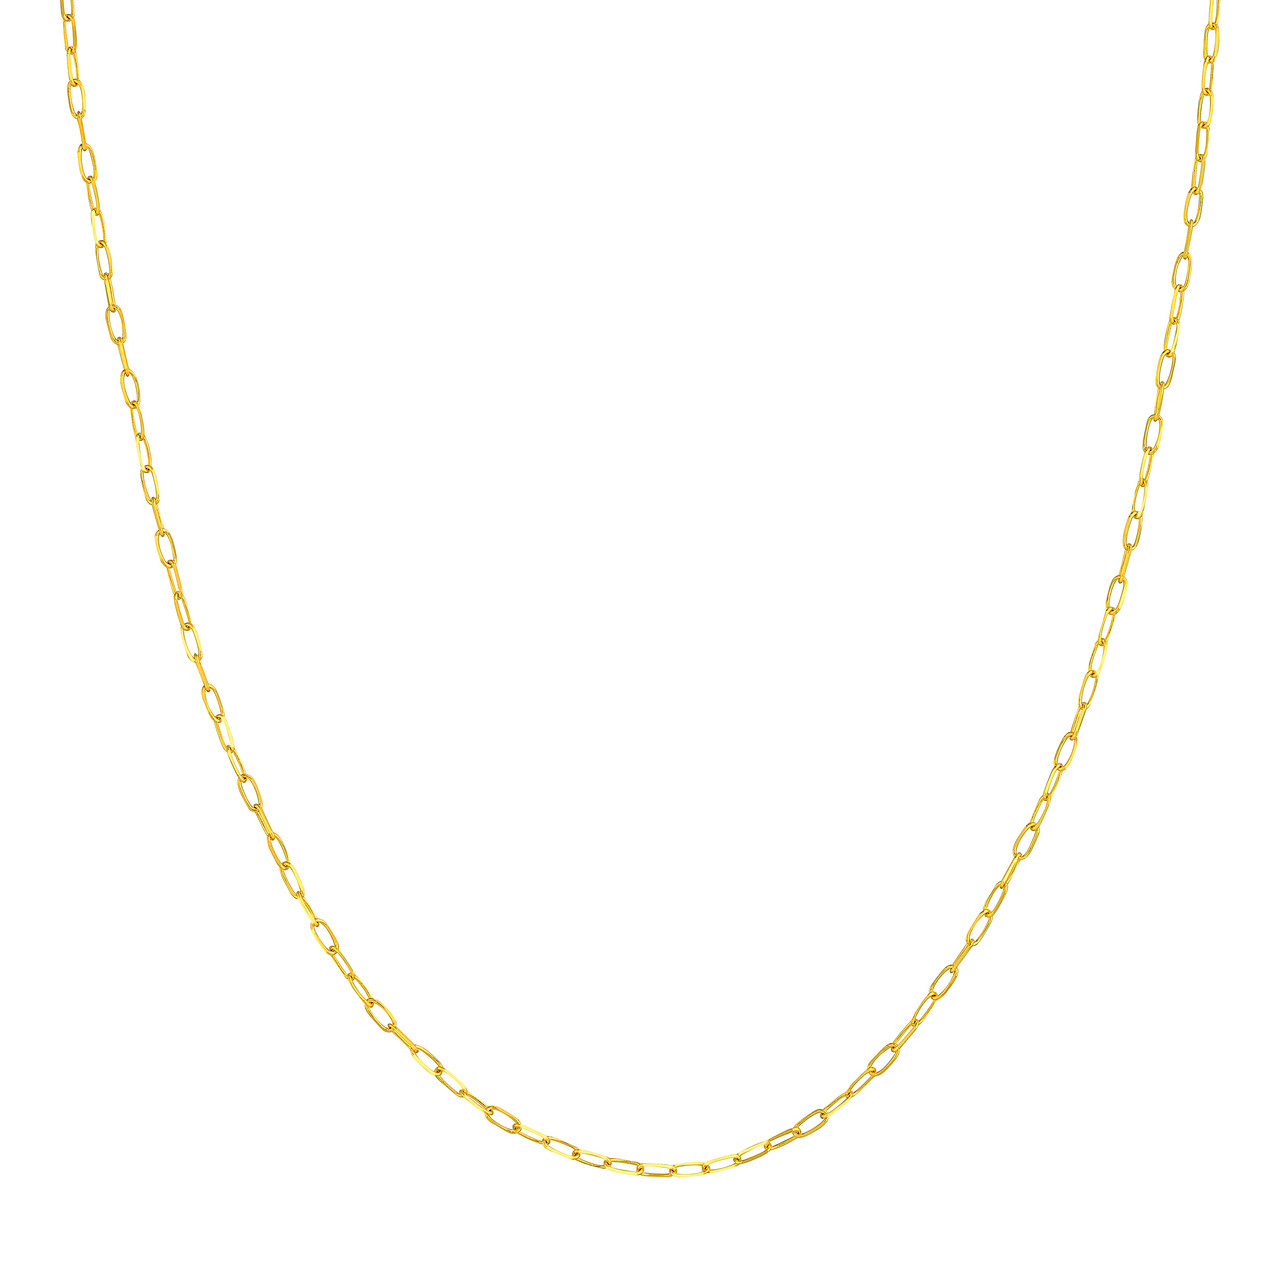 Yellow Gold Solid Petite1.7mm Paperclip Chain Necklace l 16 inches